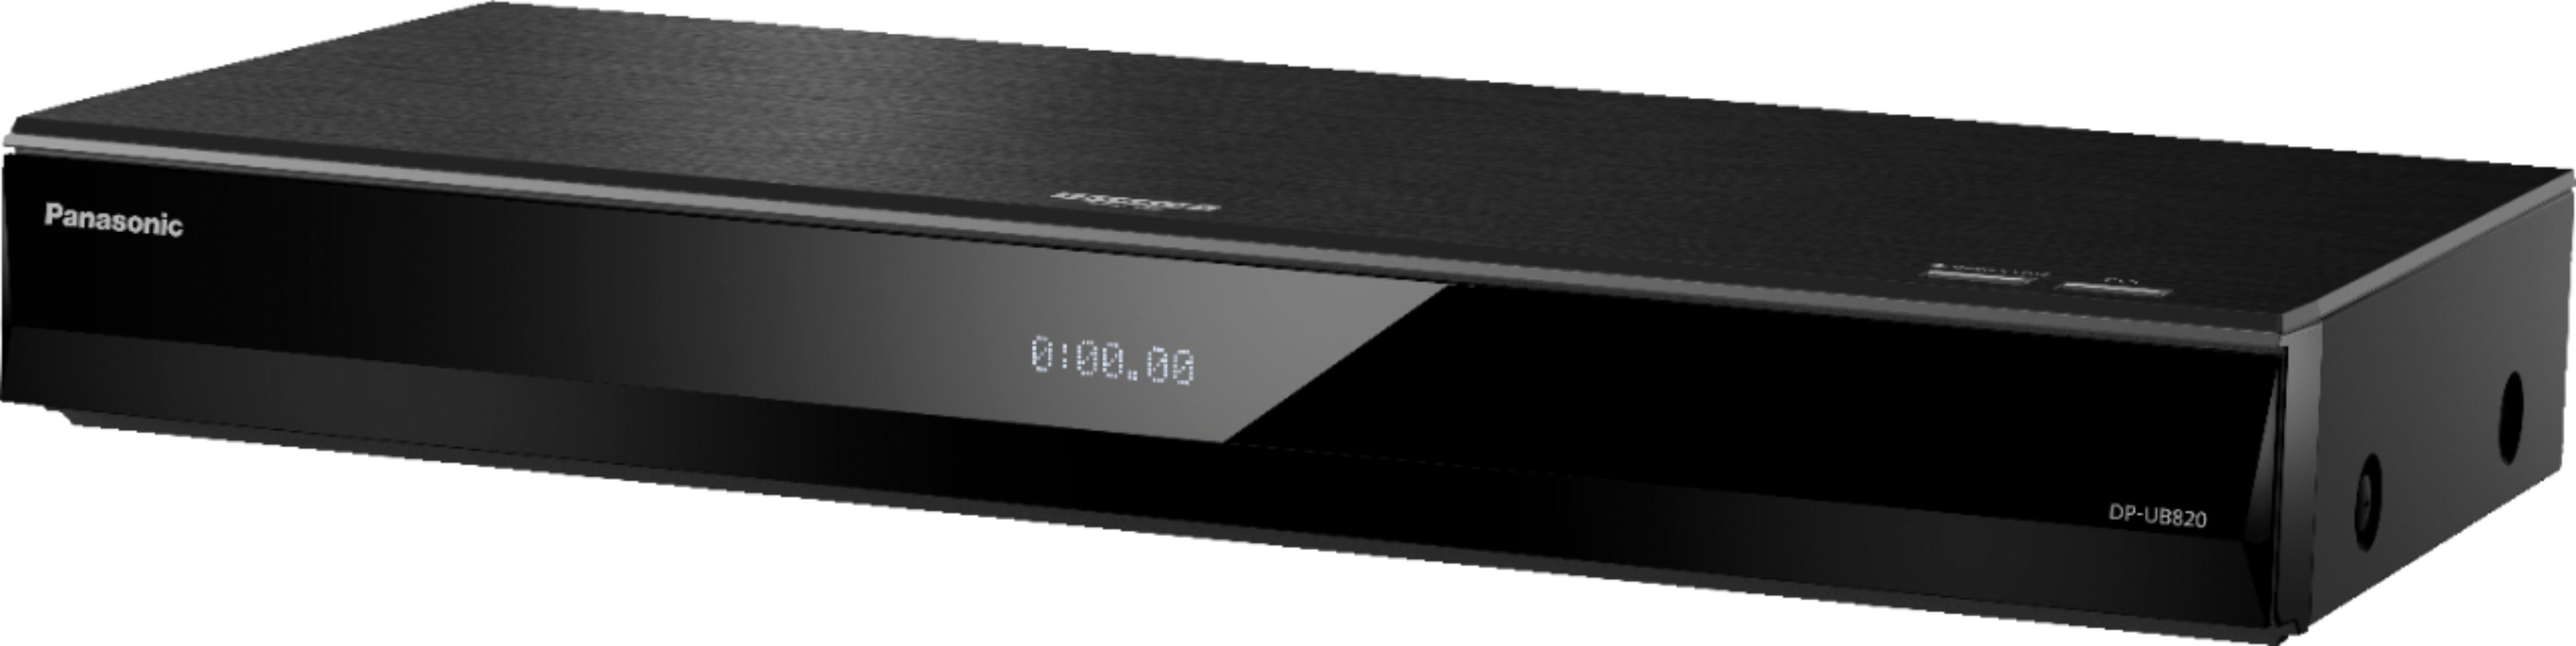 Panasonic Streaming 4K Ultra HD Hi-Res Audio with Dolby Vision 7.1 